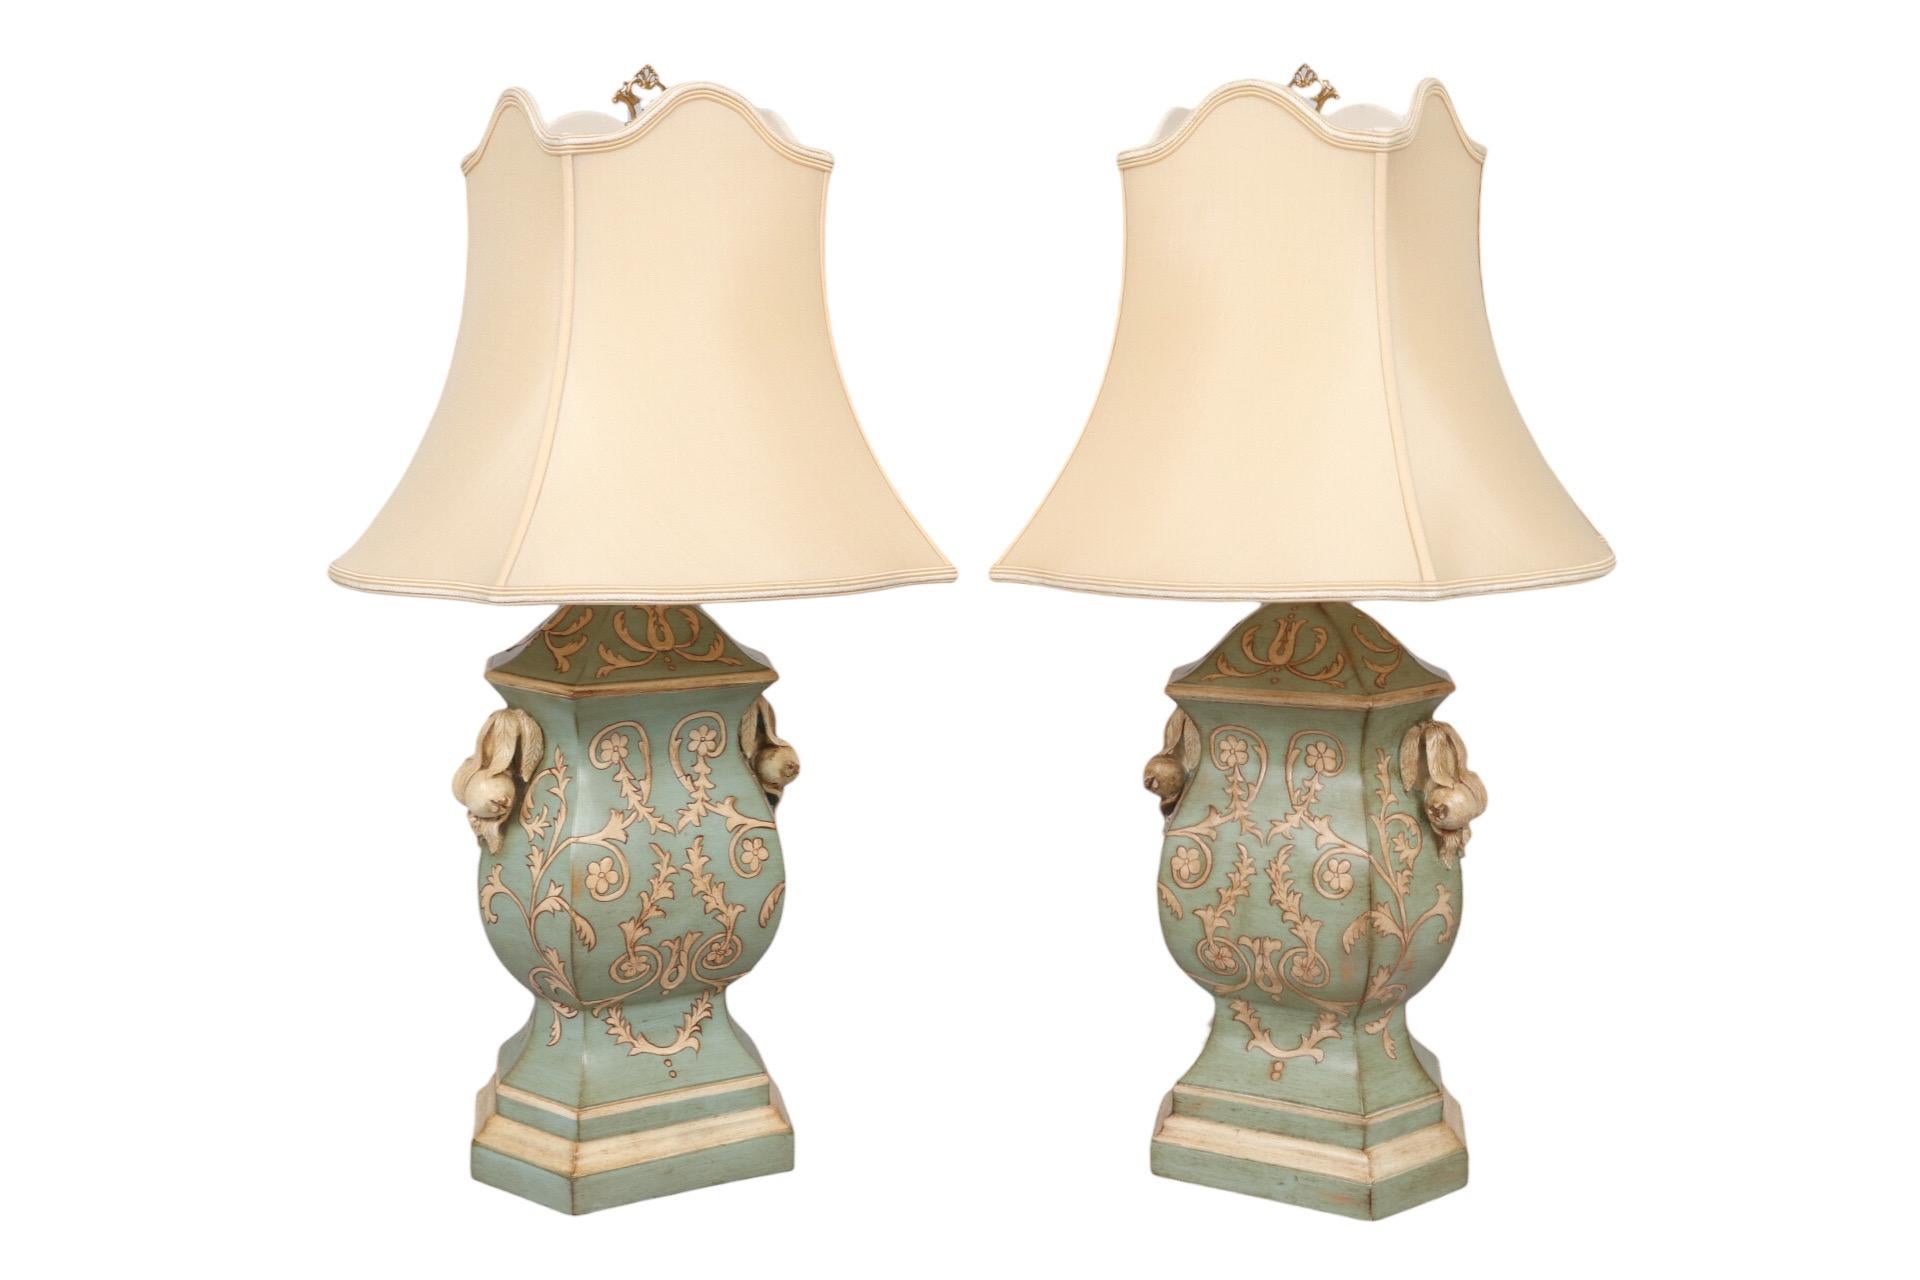 A pair of bombé hexagonal table lamps by Chelsea House. Made of resin and hand painted in a pale turquoise color, with intertwining stems of cream leaves and flowers. Each lamp is decorated on both sides with berries and leaves, has a hexagonal,